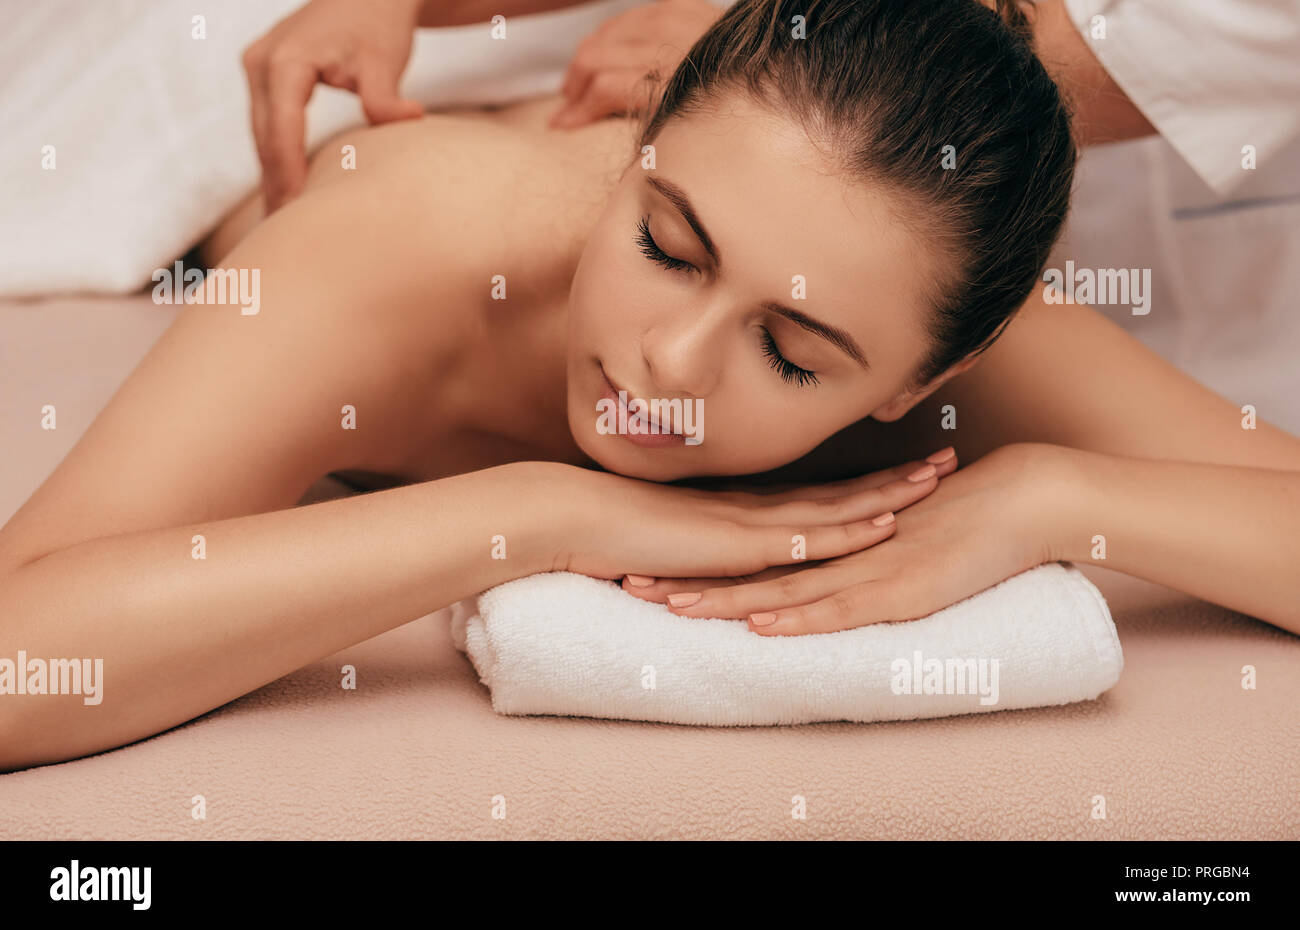 young woman on a massage table in a wellness spa salon Stock Photo